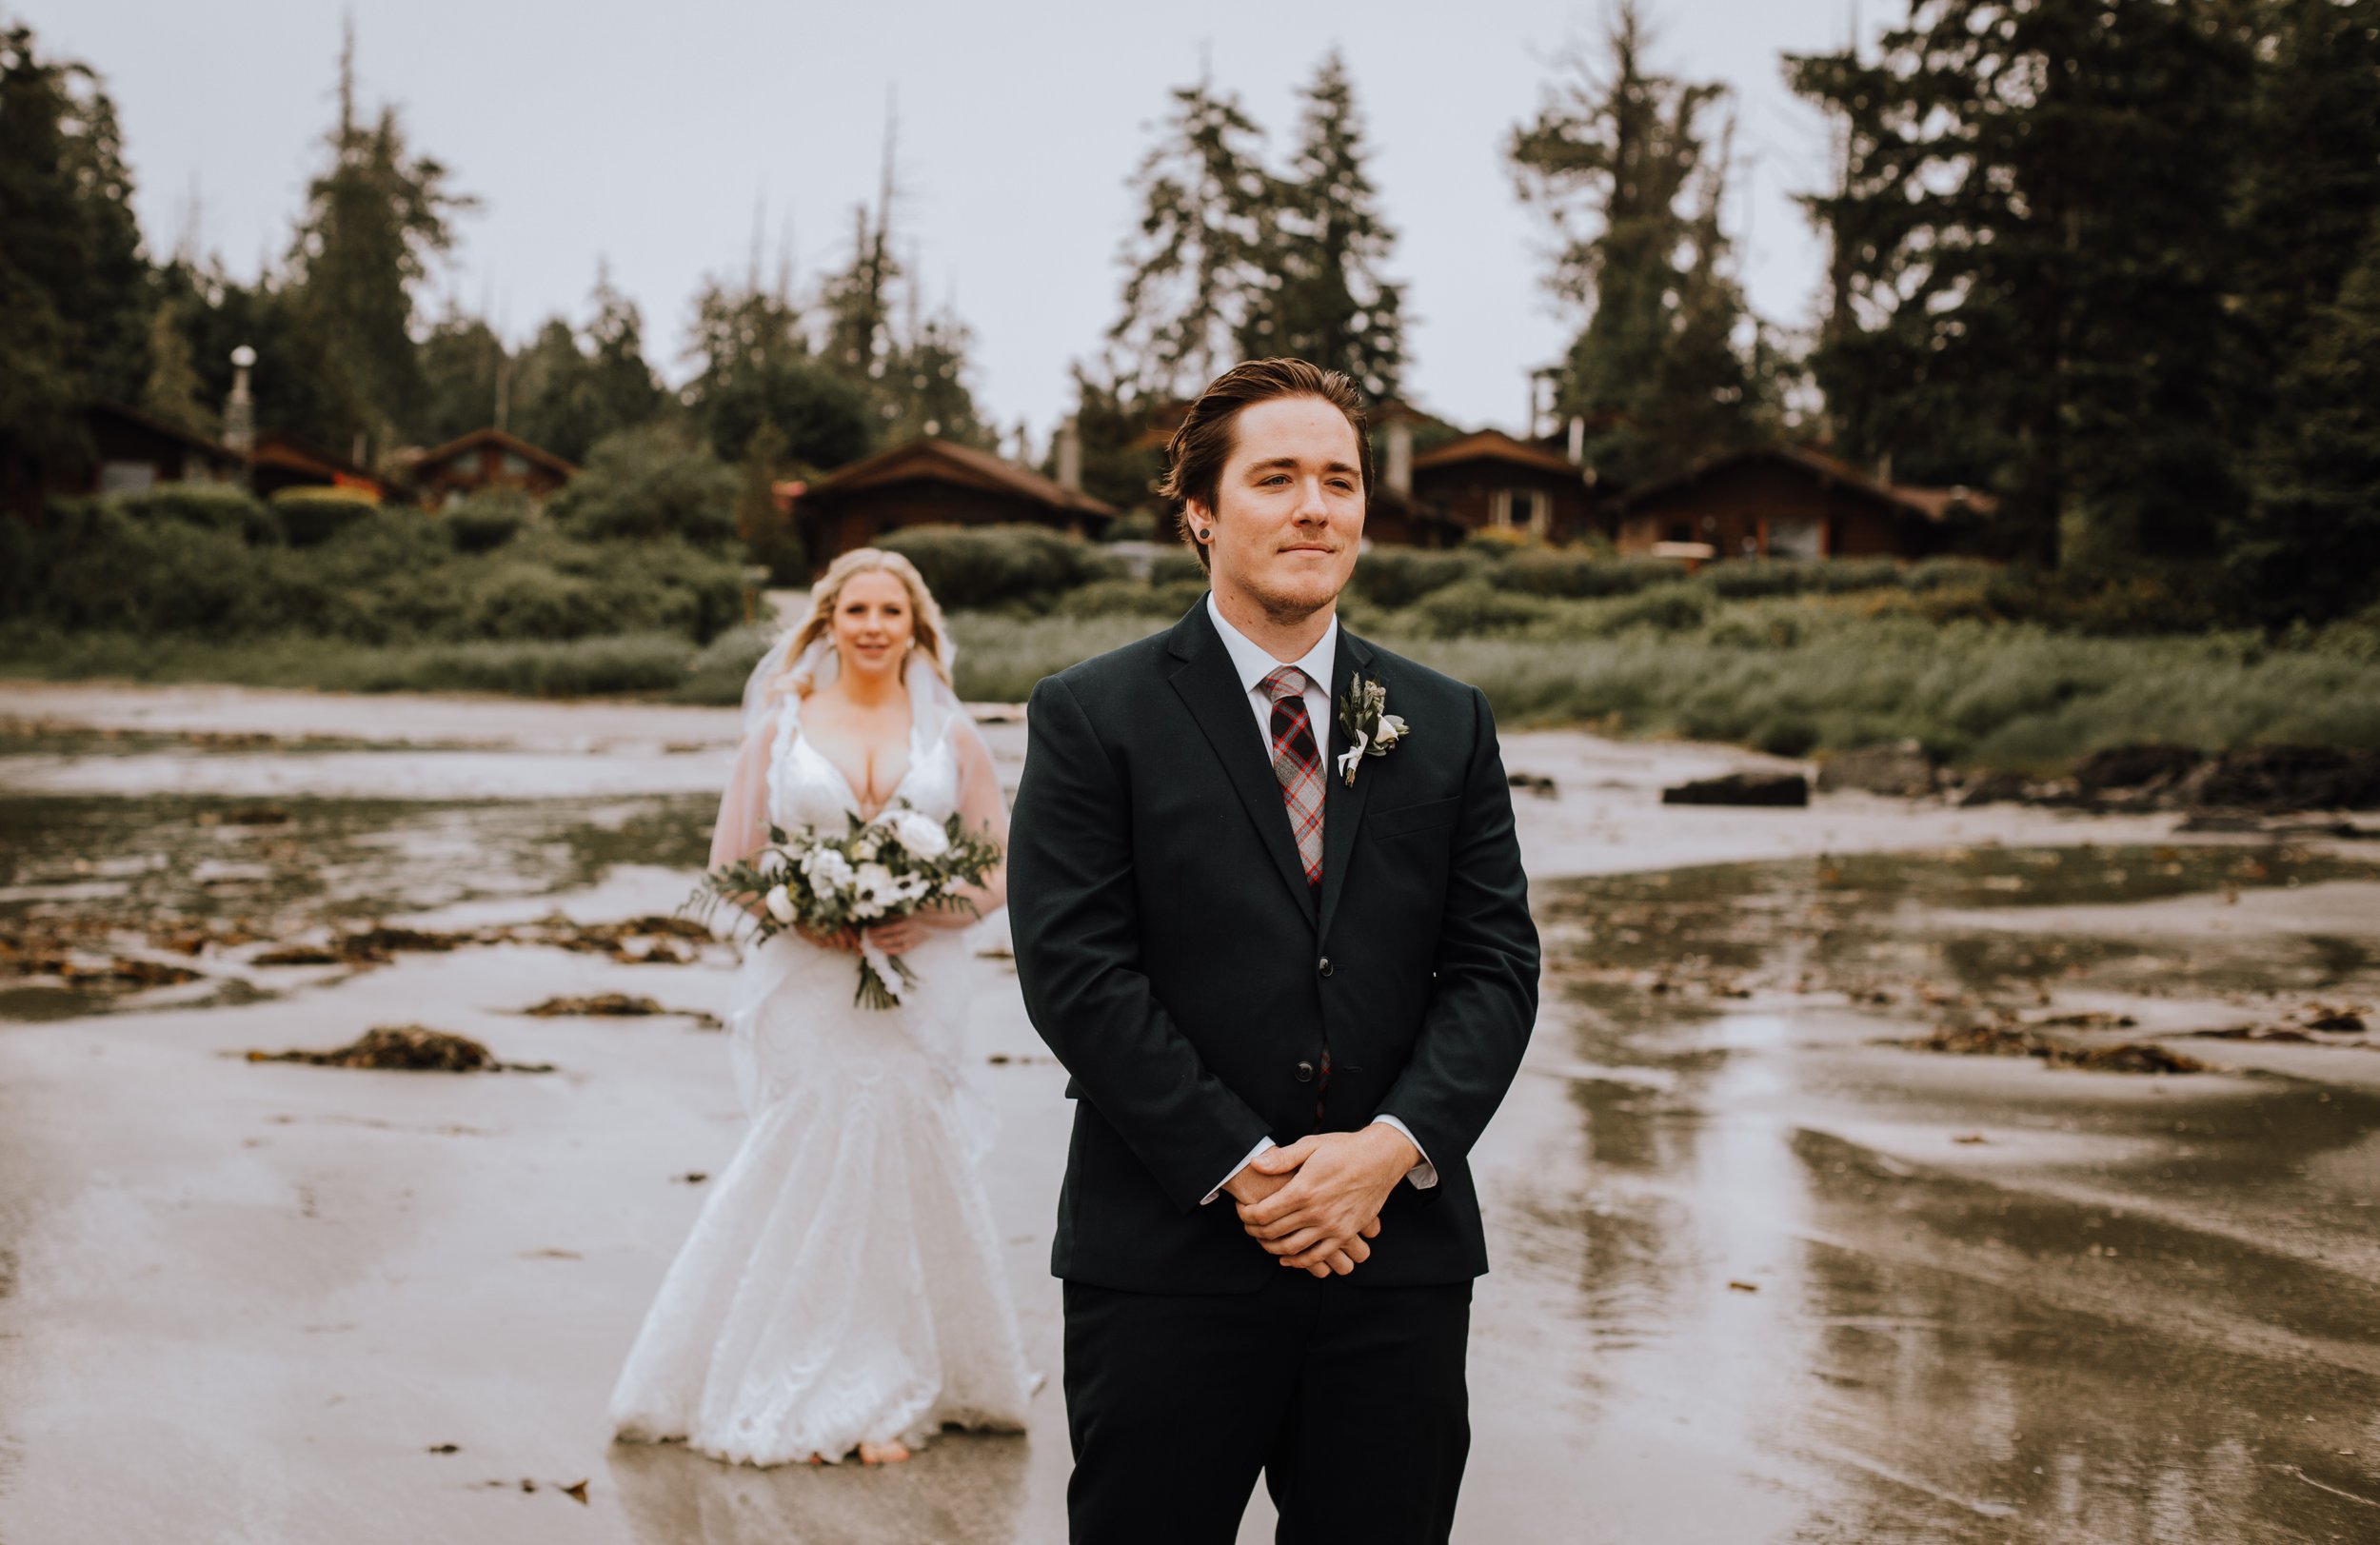 Brooke and Devin Wedding - Tin Wis Best Western Tofino Vancouver Island British Columbia - Elyse Anna Photography-1648.jpg